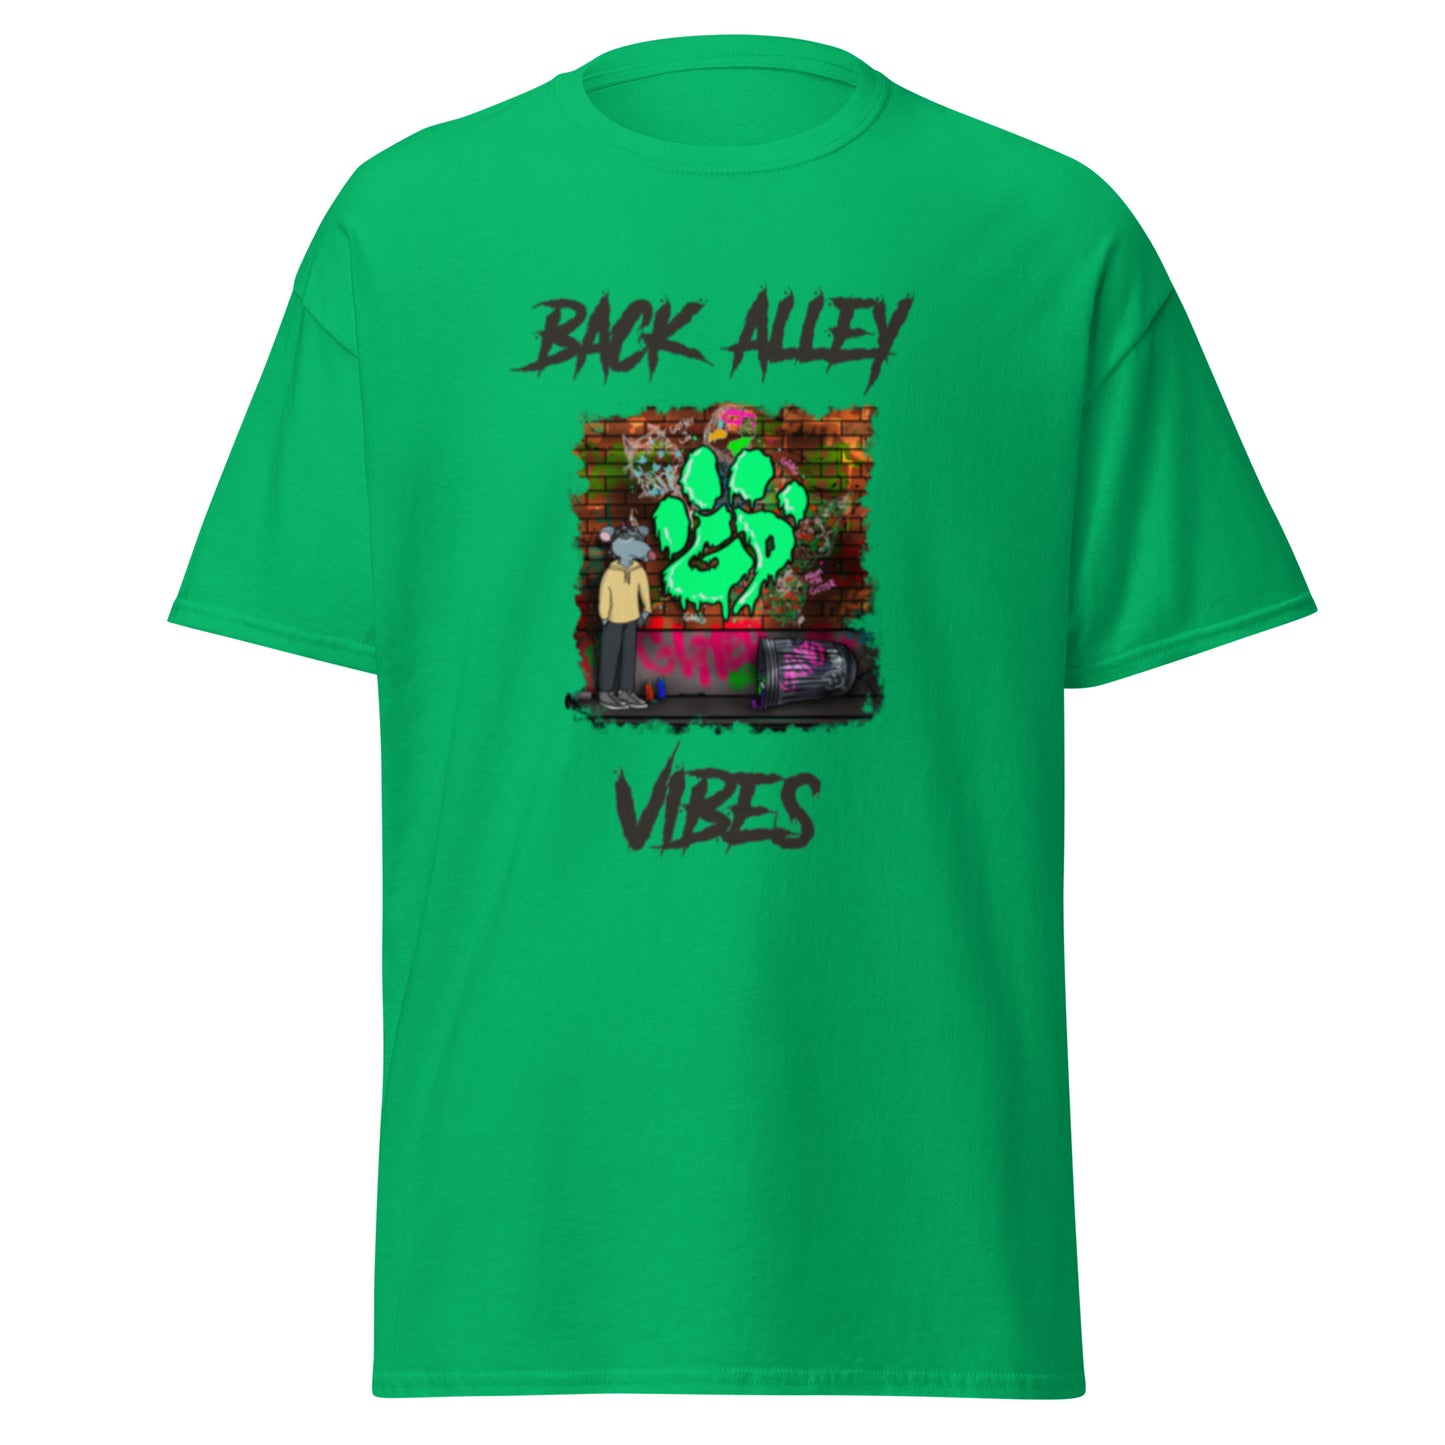 GP Back Alley Vibes T-Shirt